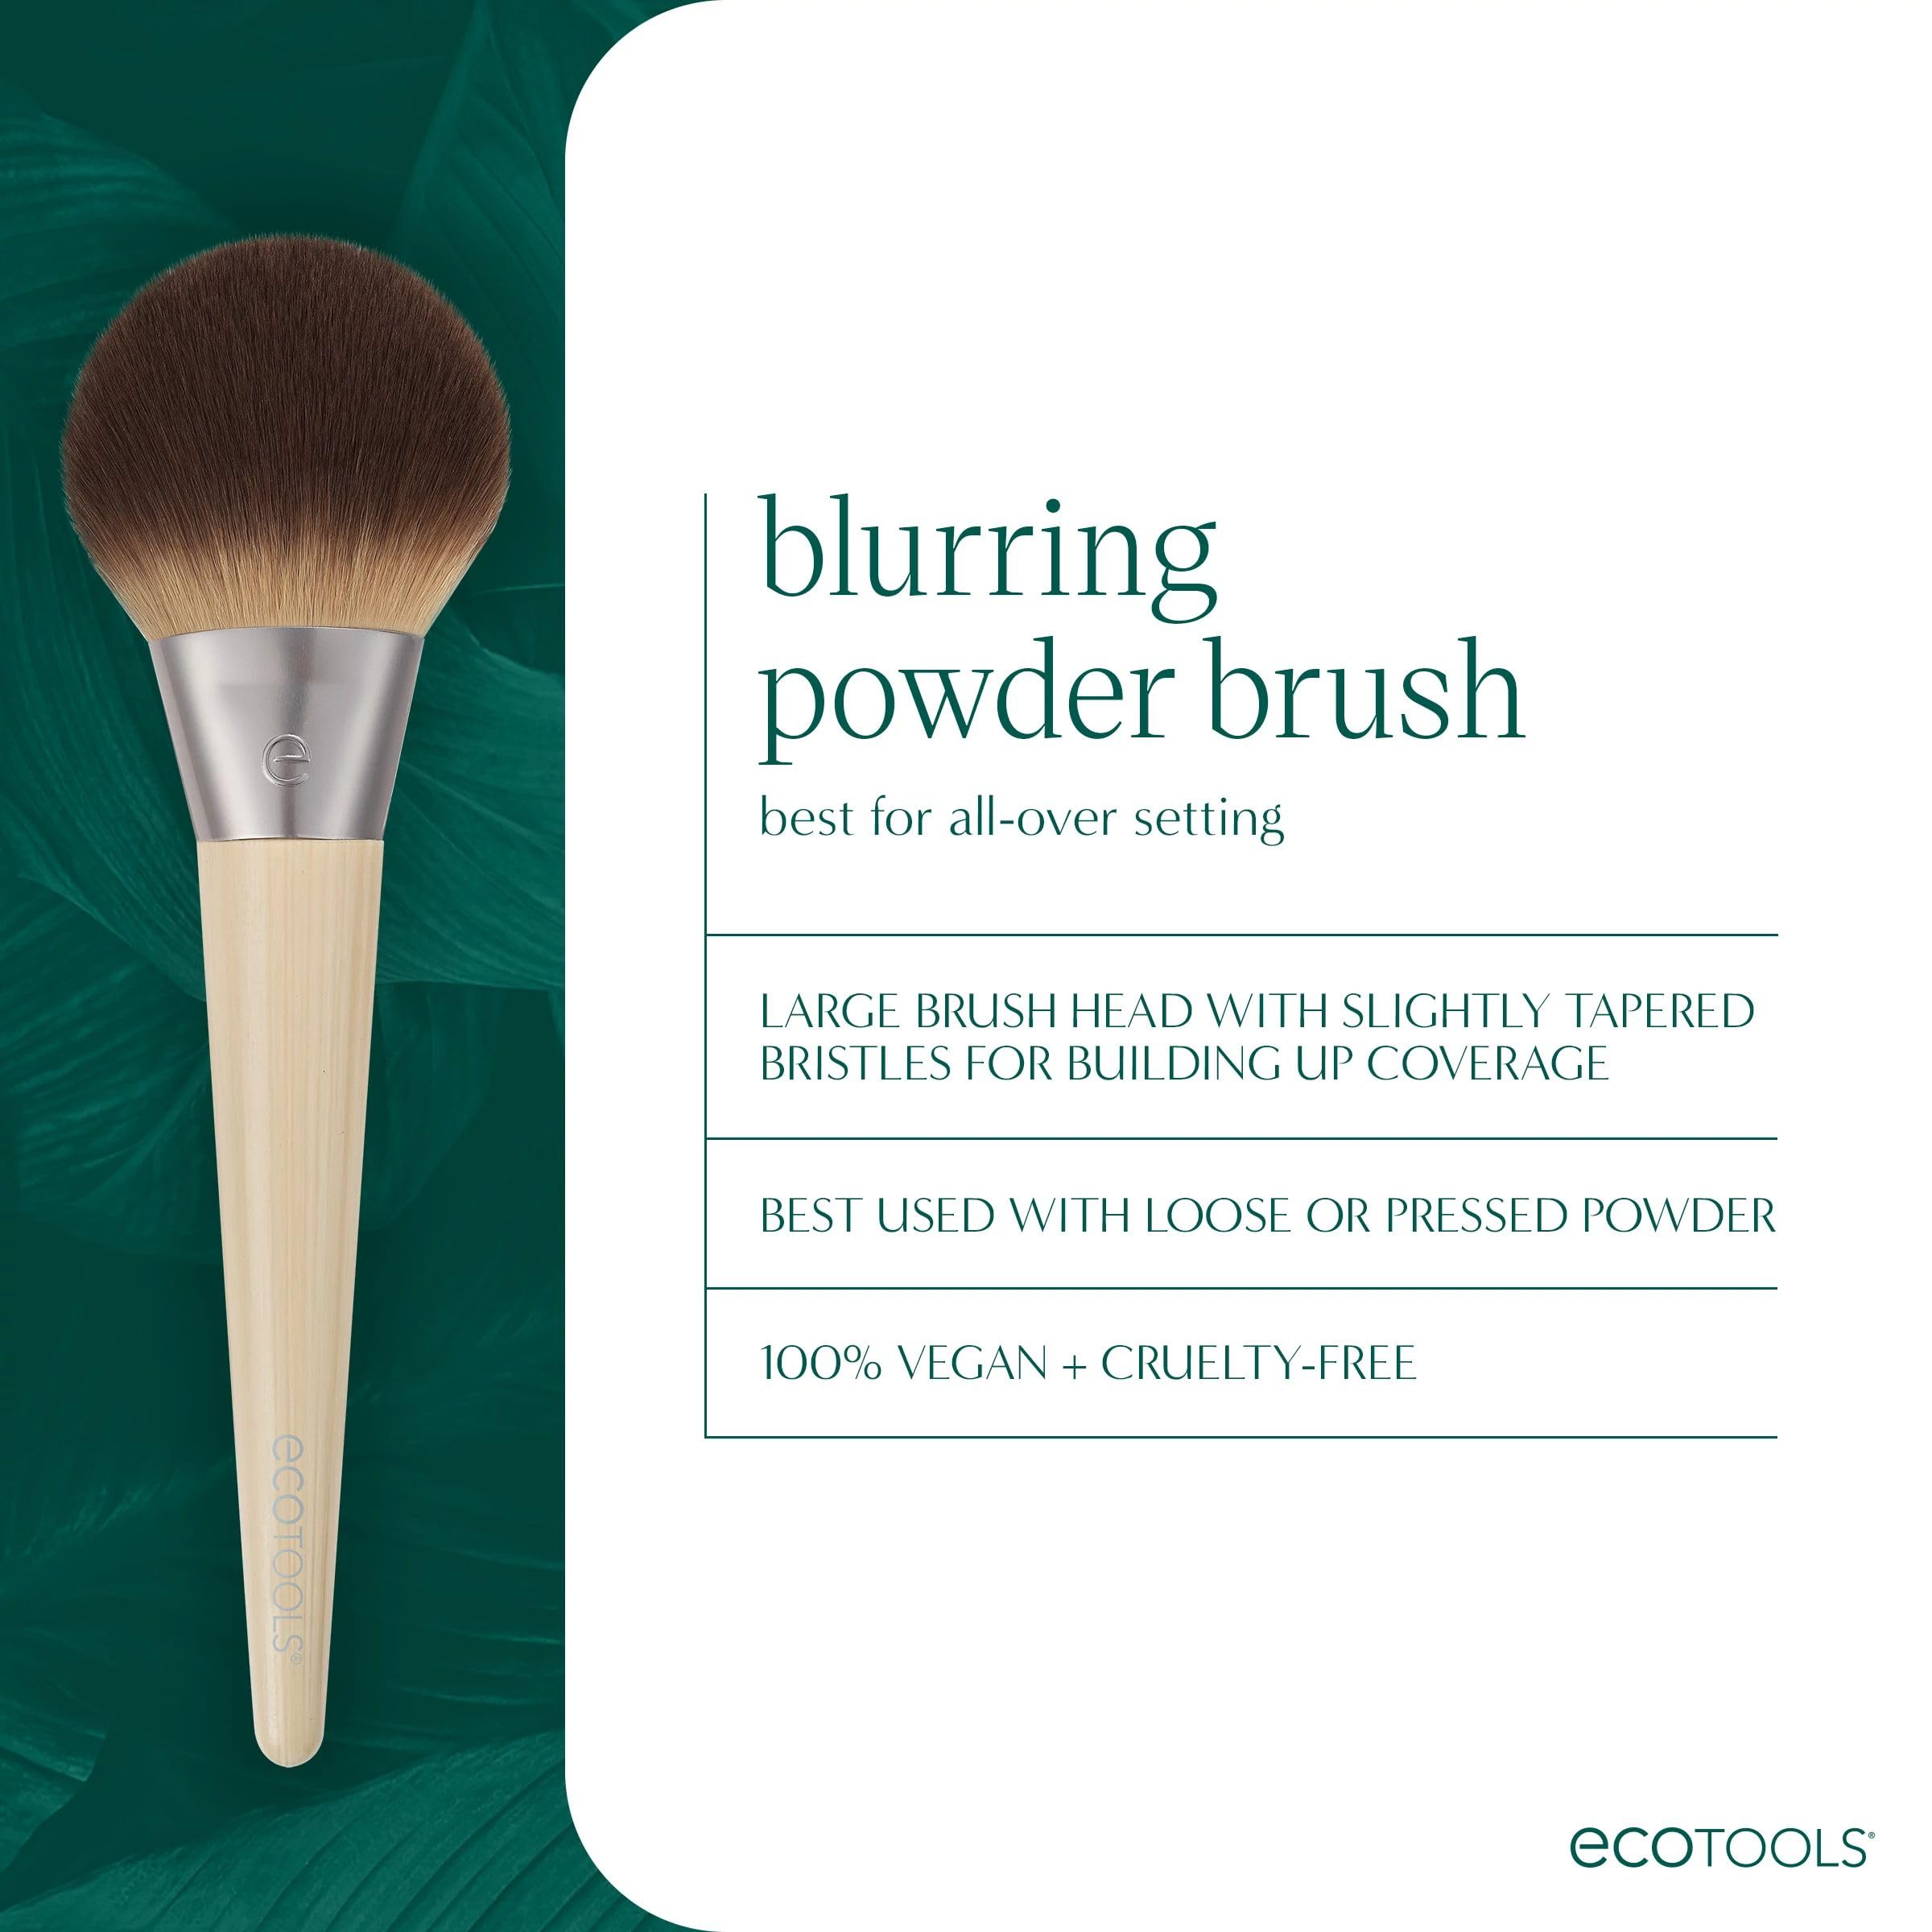 EcoTools Blurring Powder Makeup Brush, For Loose & Pressed Powder, Large Makeup Brush For All-Over Application, Fluffy, Synthetic Bristles, Eco Friendly, Cruelty-Free, & Vegan, 1 Count